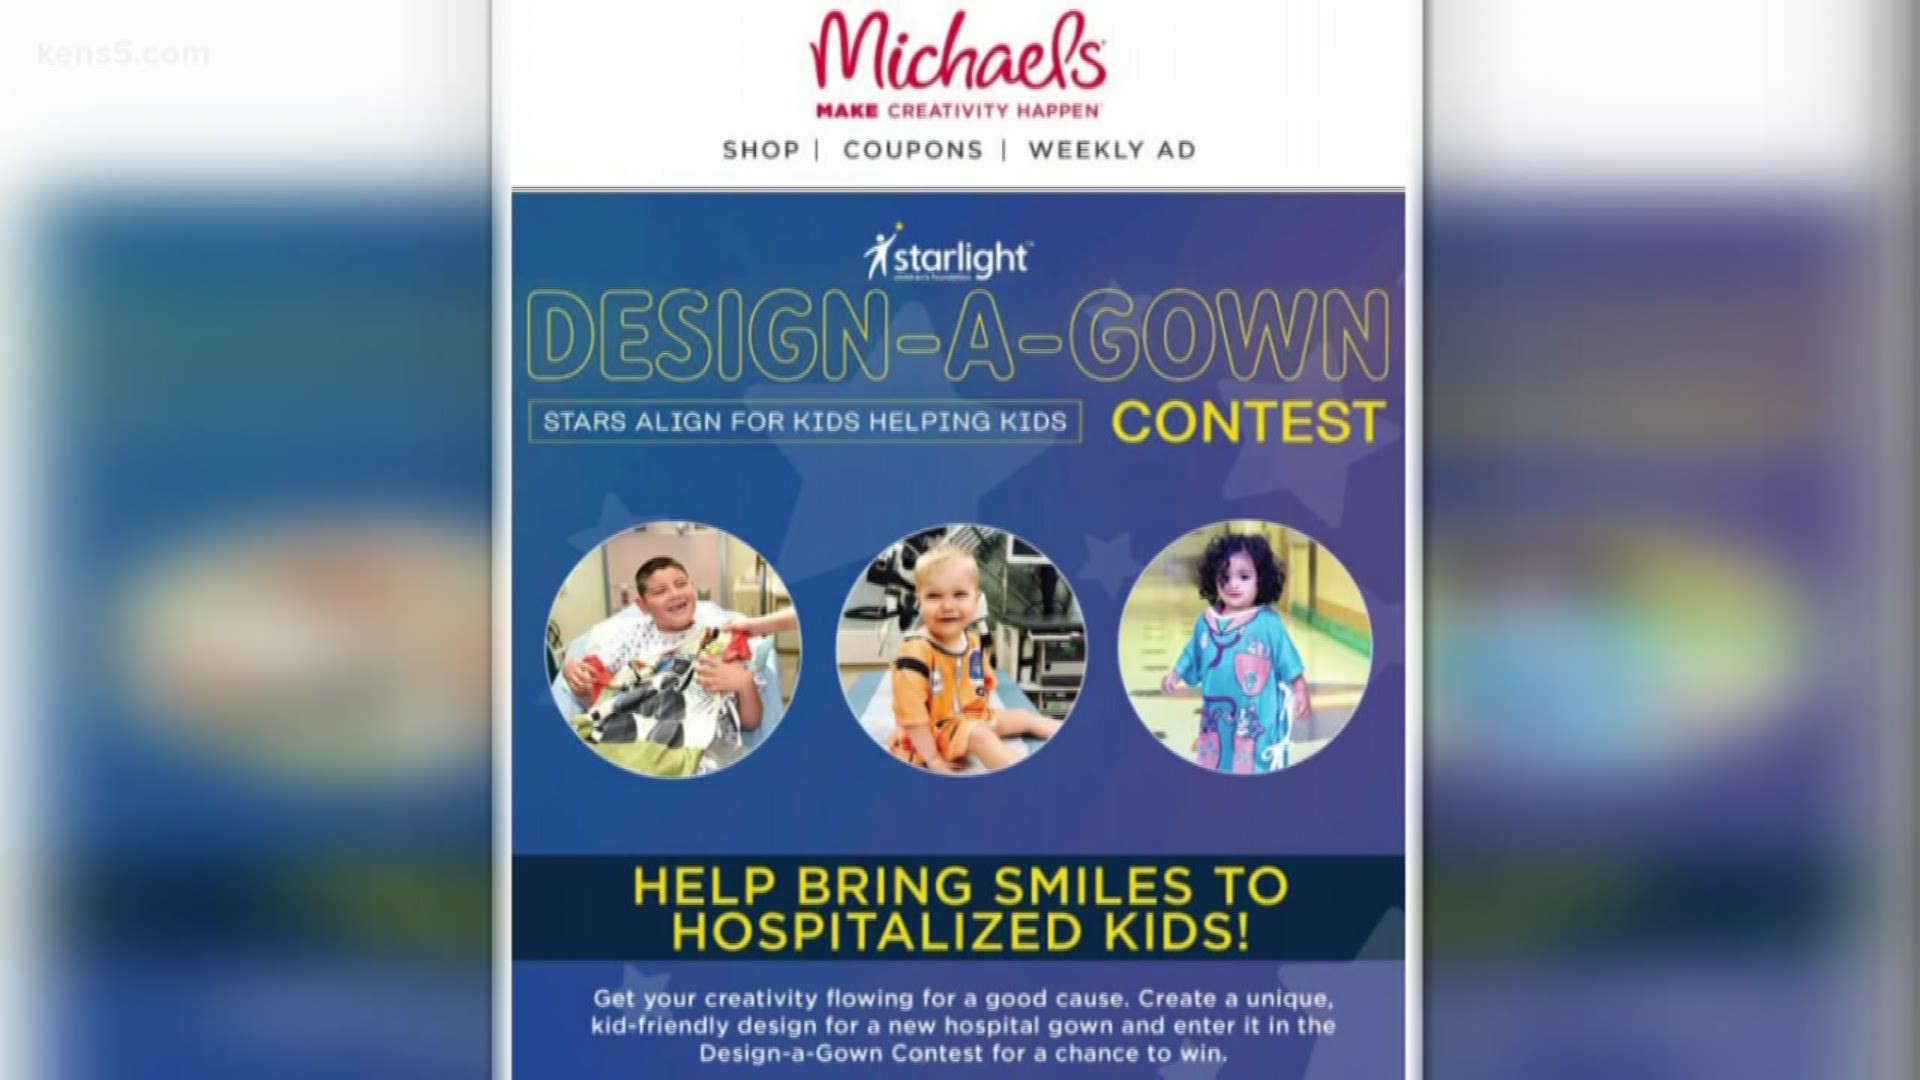 Michaels is hosting a "Design-a-gown" contest for children who have to be hospitalized. The deadline is Feb. 20.